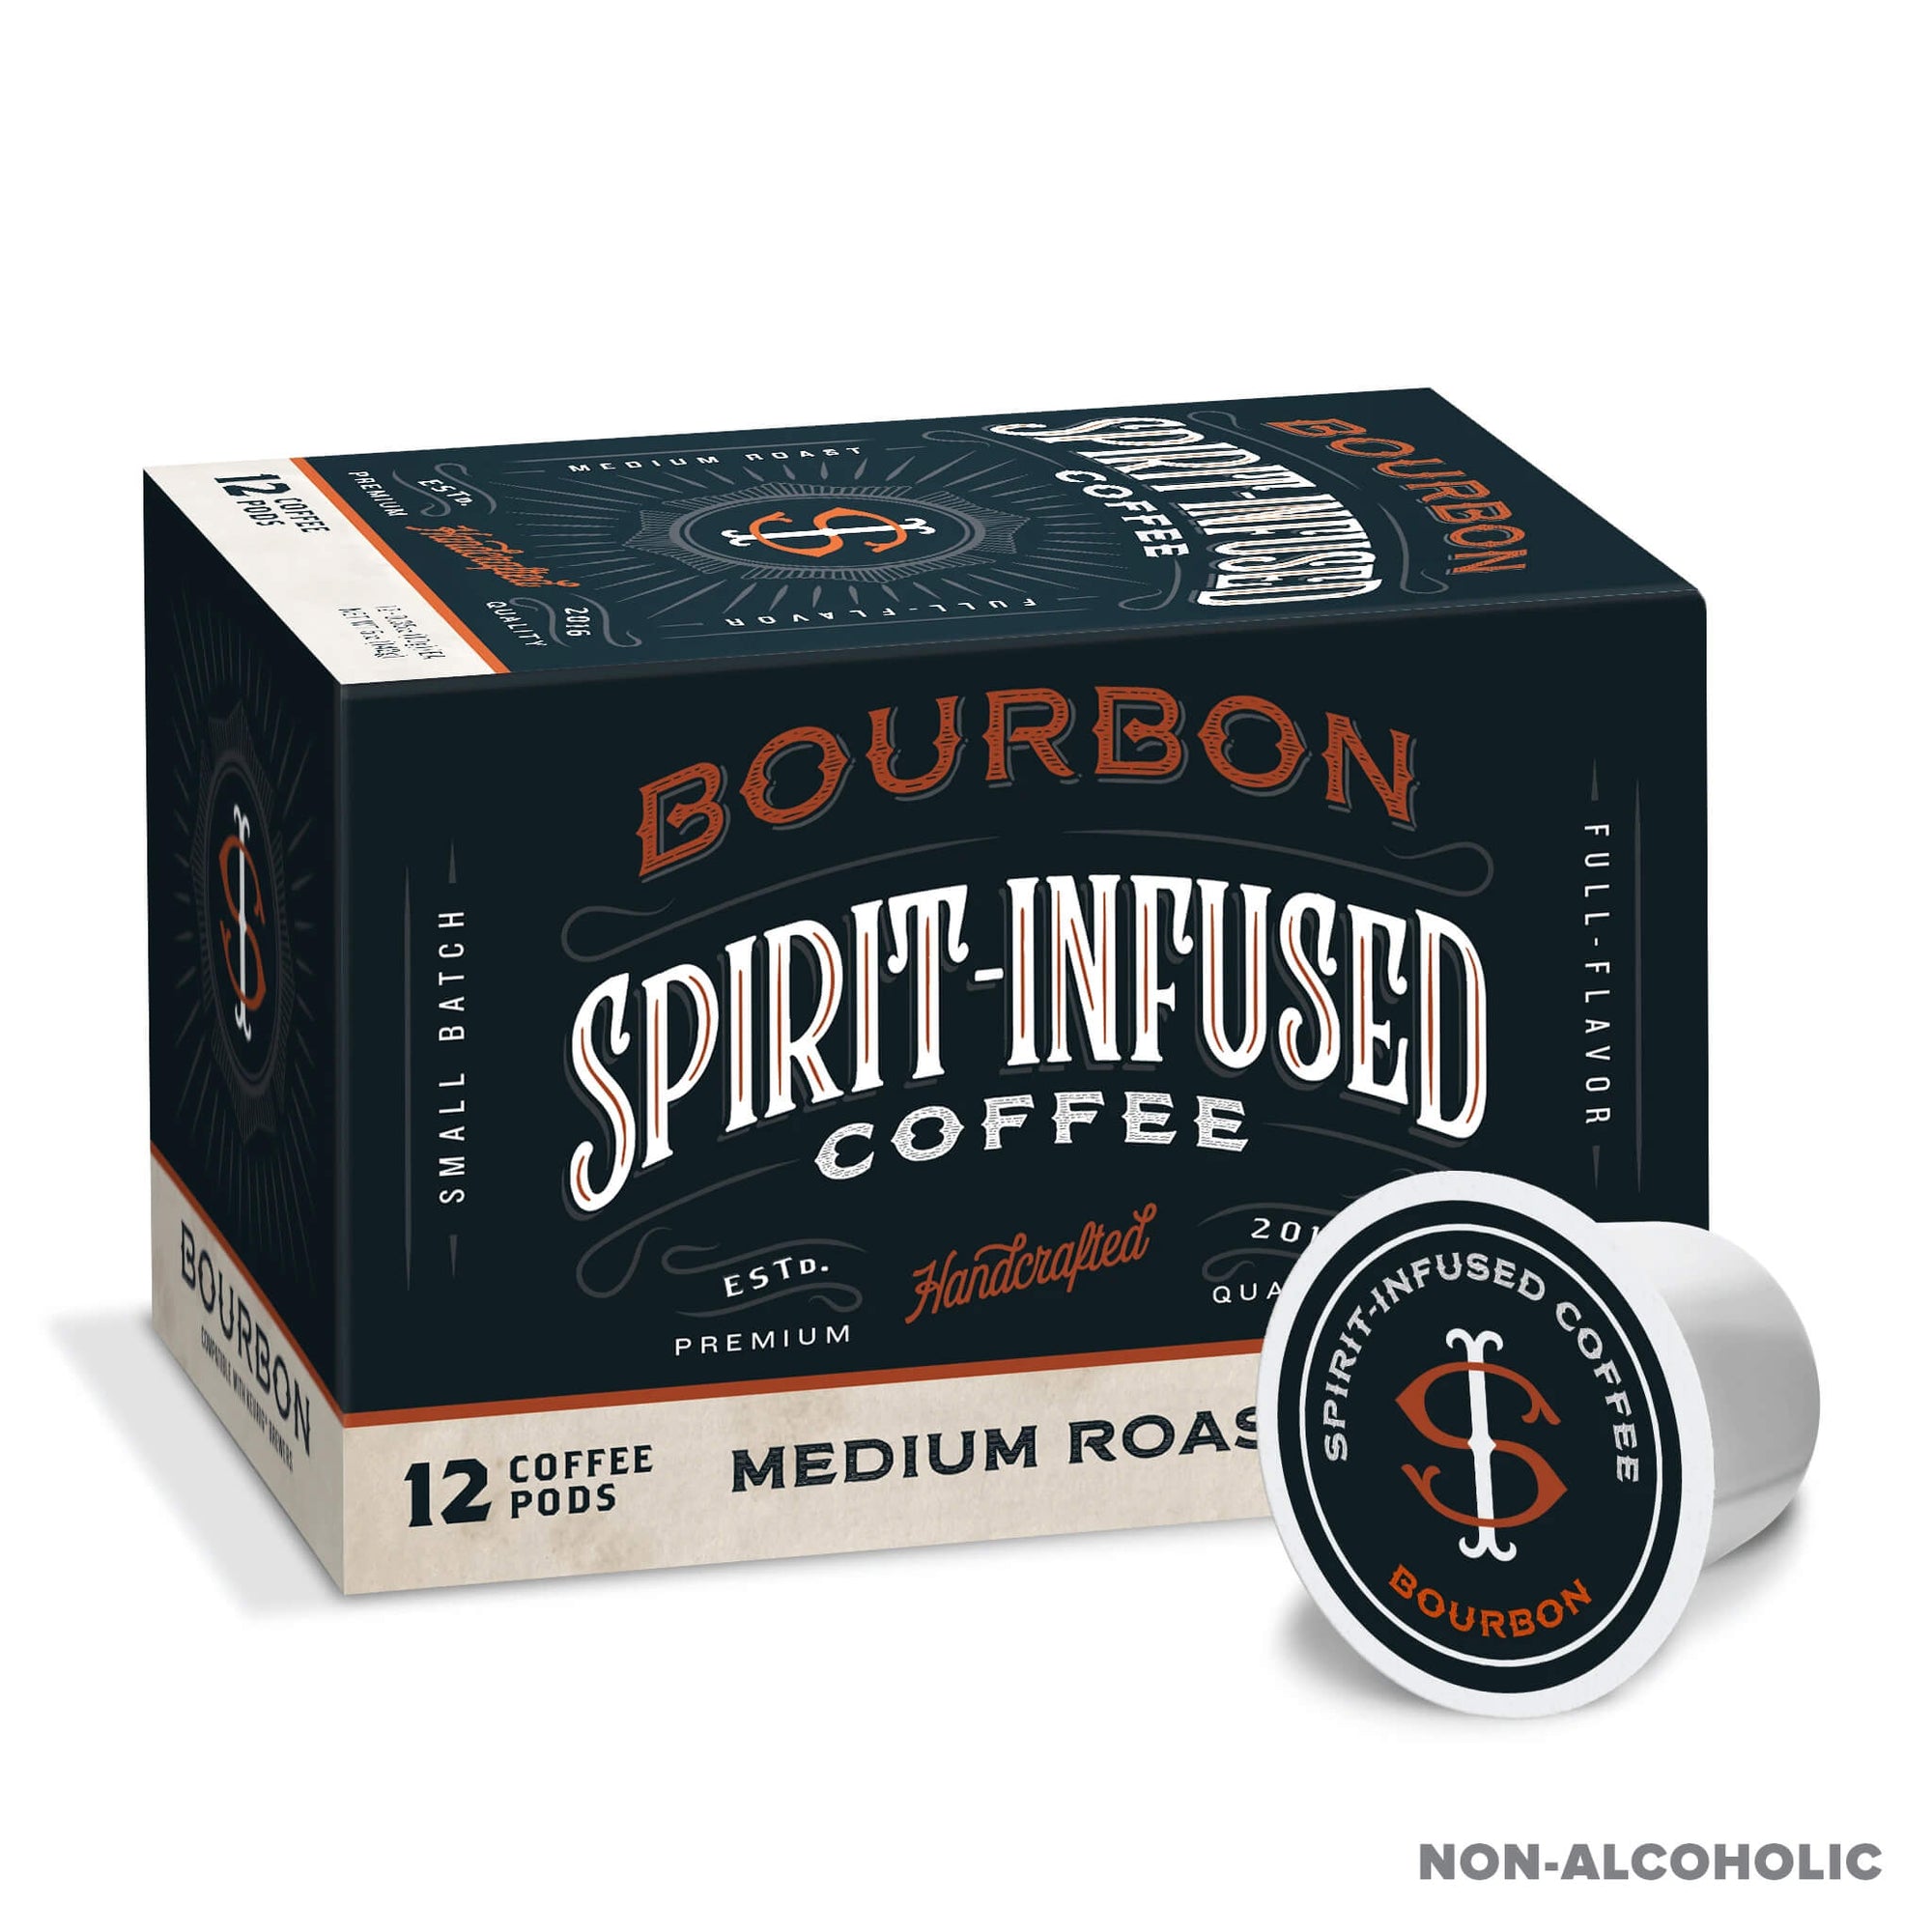 A 12 count box of Fire Department Coffee's Bourbon Infused Coffee Pods with a "non-alcoholic" stamp in the bottom right corner